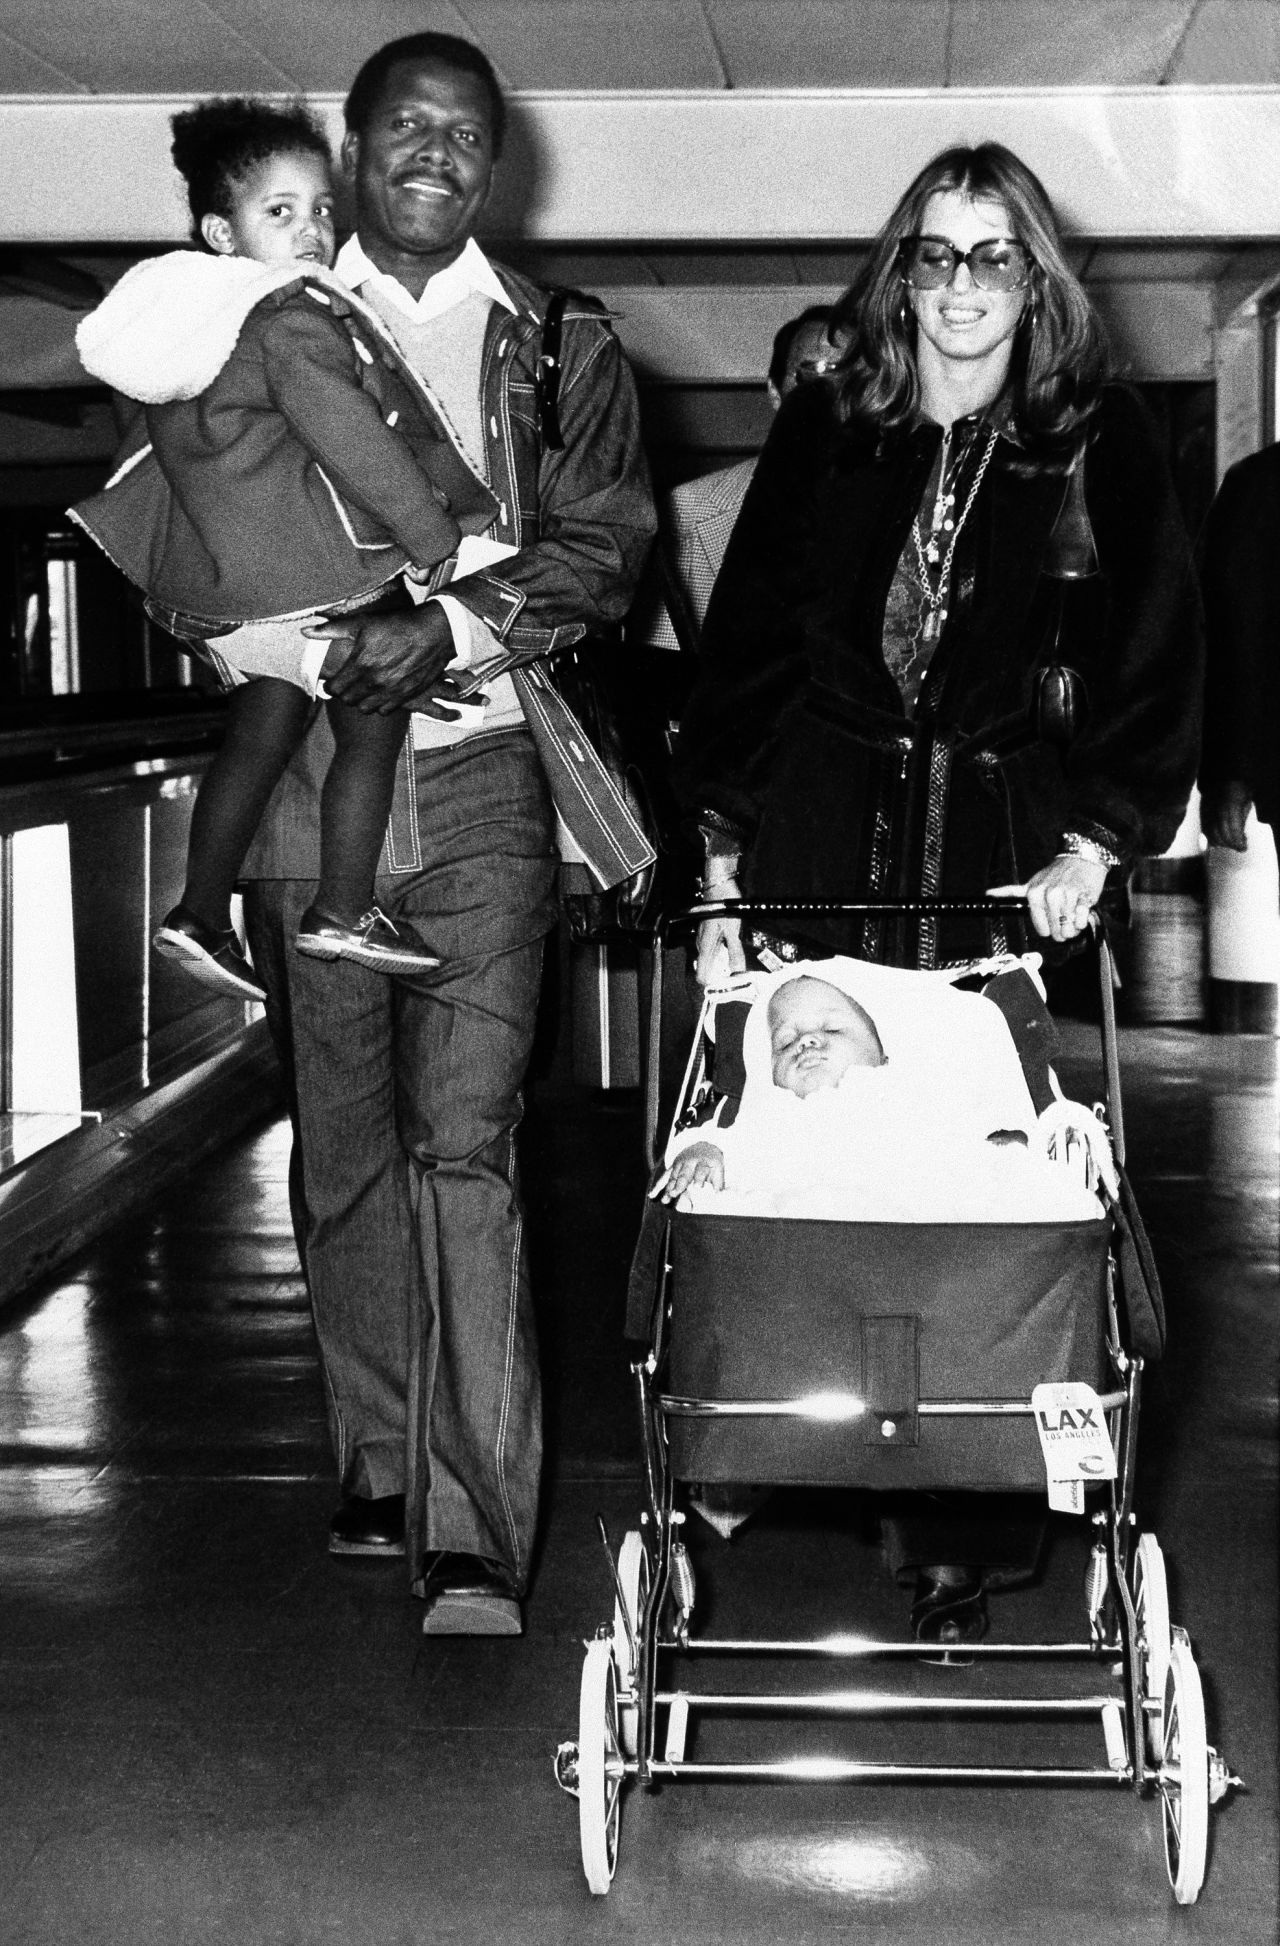 Poitier carries his daughter Anika as his wife, actress Joanna Shimkus, wheels their younger daughter Sydney at Heathrow Airport in London in 1974.